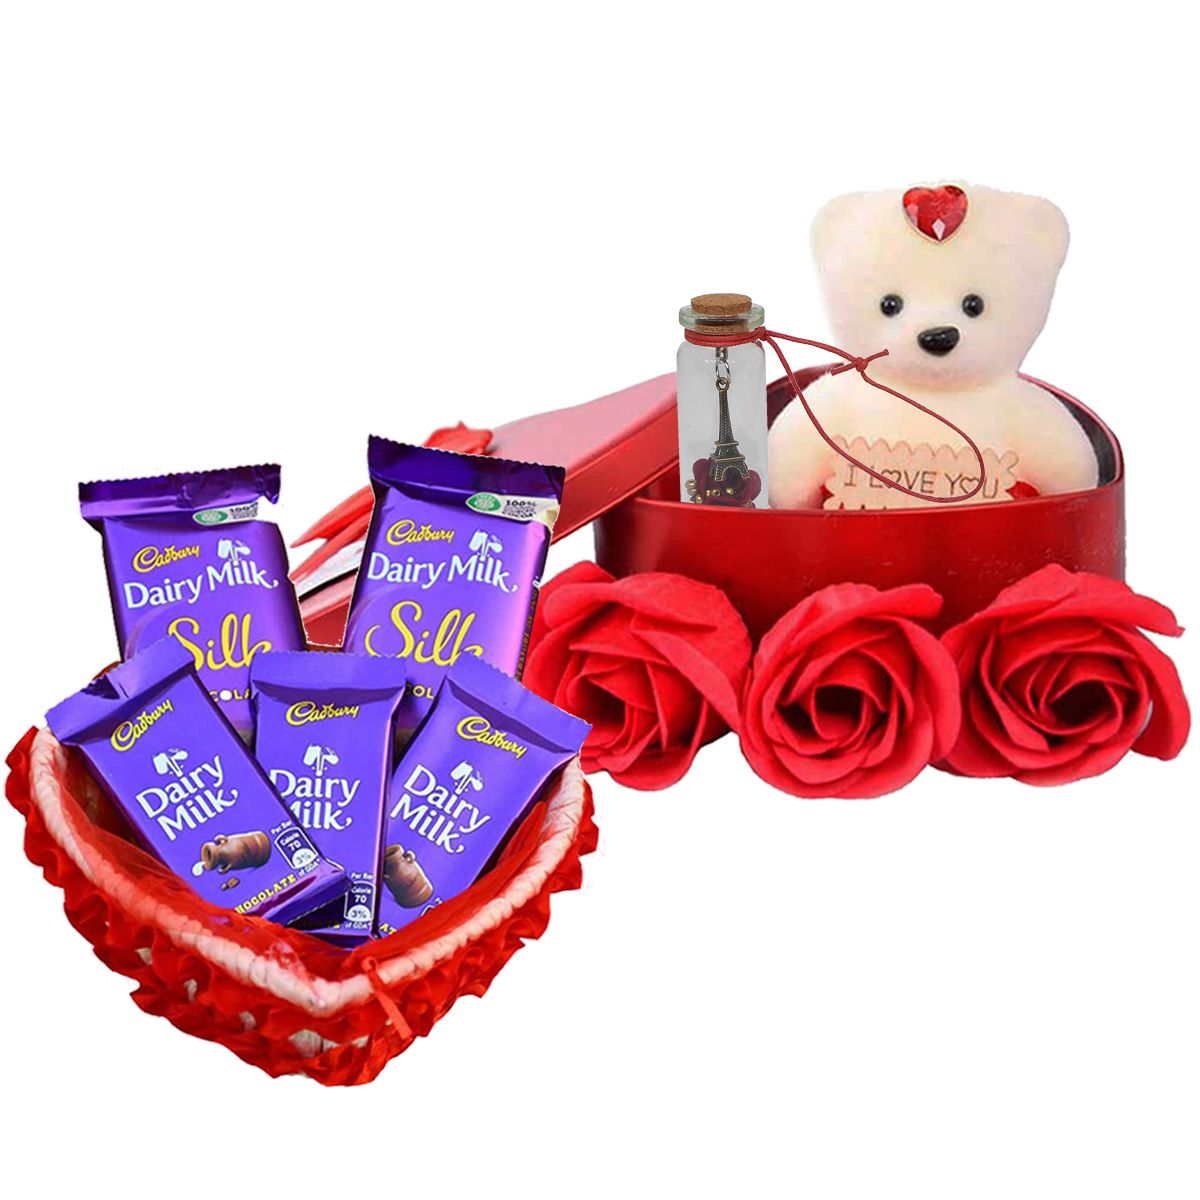 The Anniversary Box- Anniversary gift ideas – Wedding anniversary gifts  online for wife